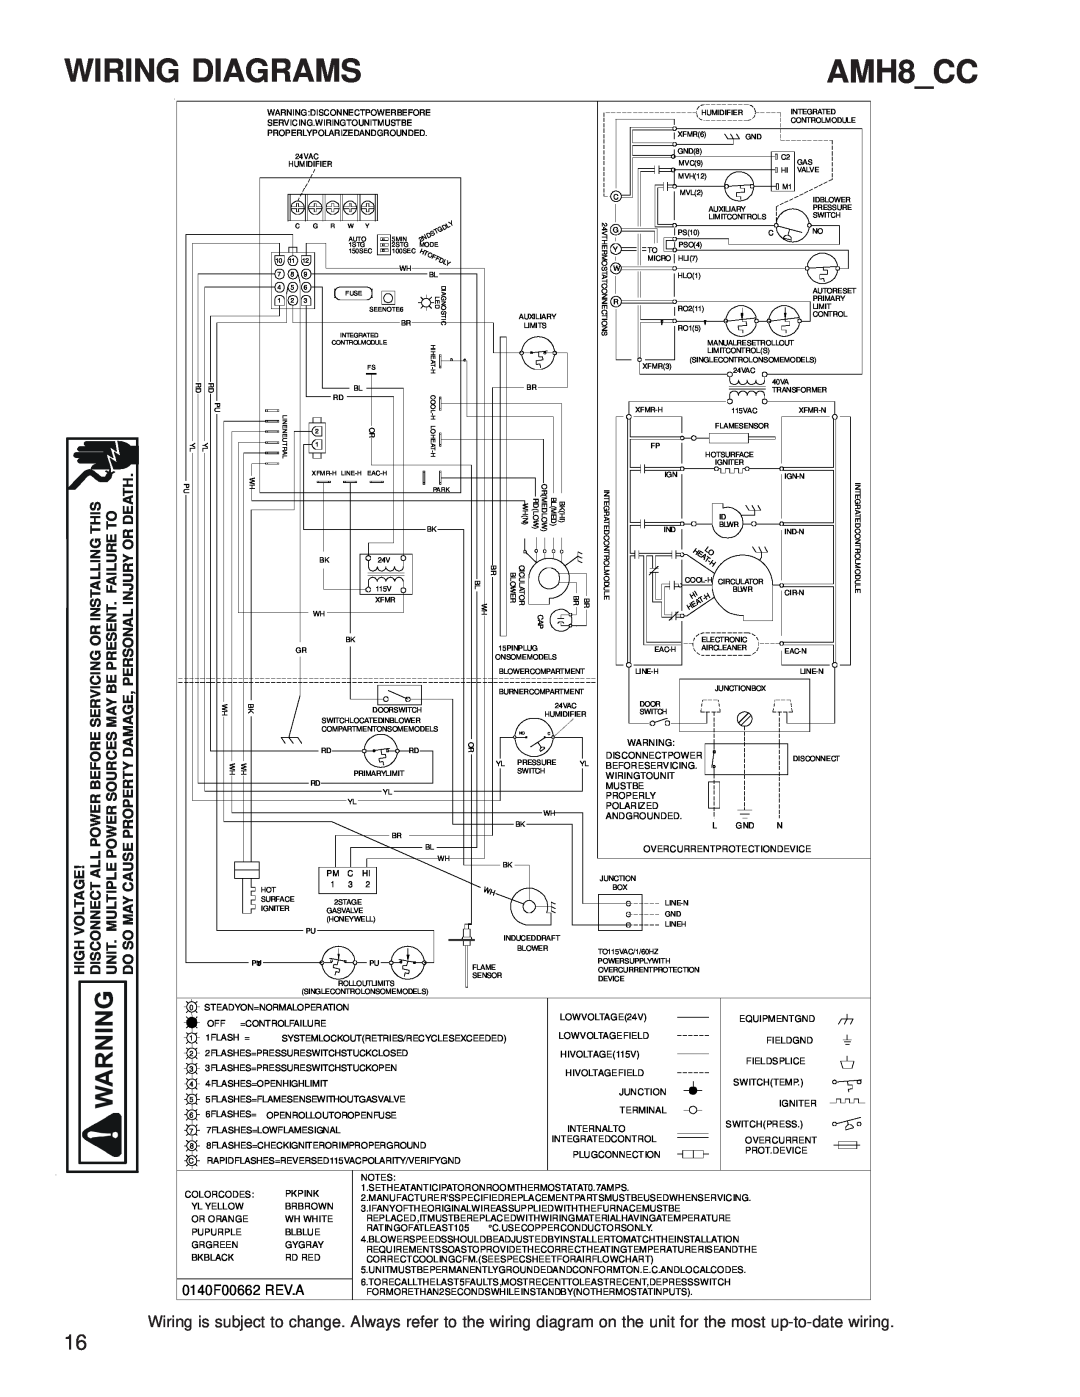 Amana AMH* service manual AMH8 CC, Wiring Diagrams, Or Installing This Failure To Injury Or Death, Hl Eao T H 